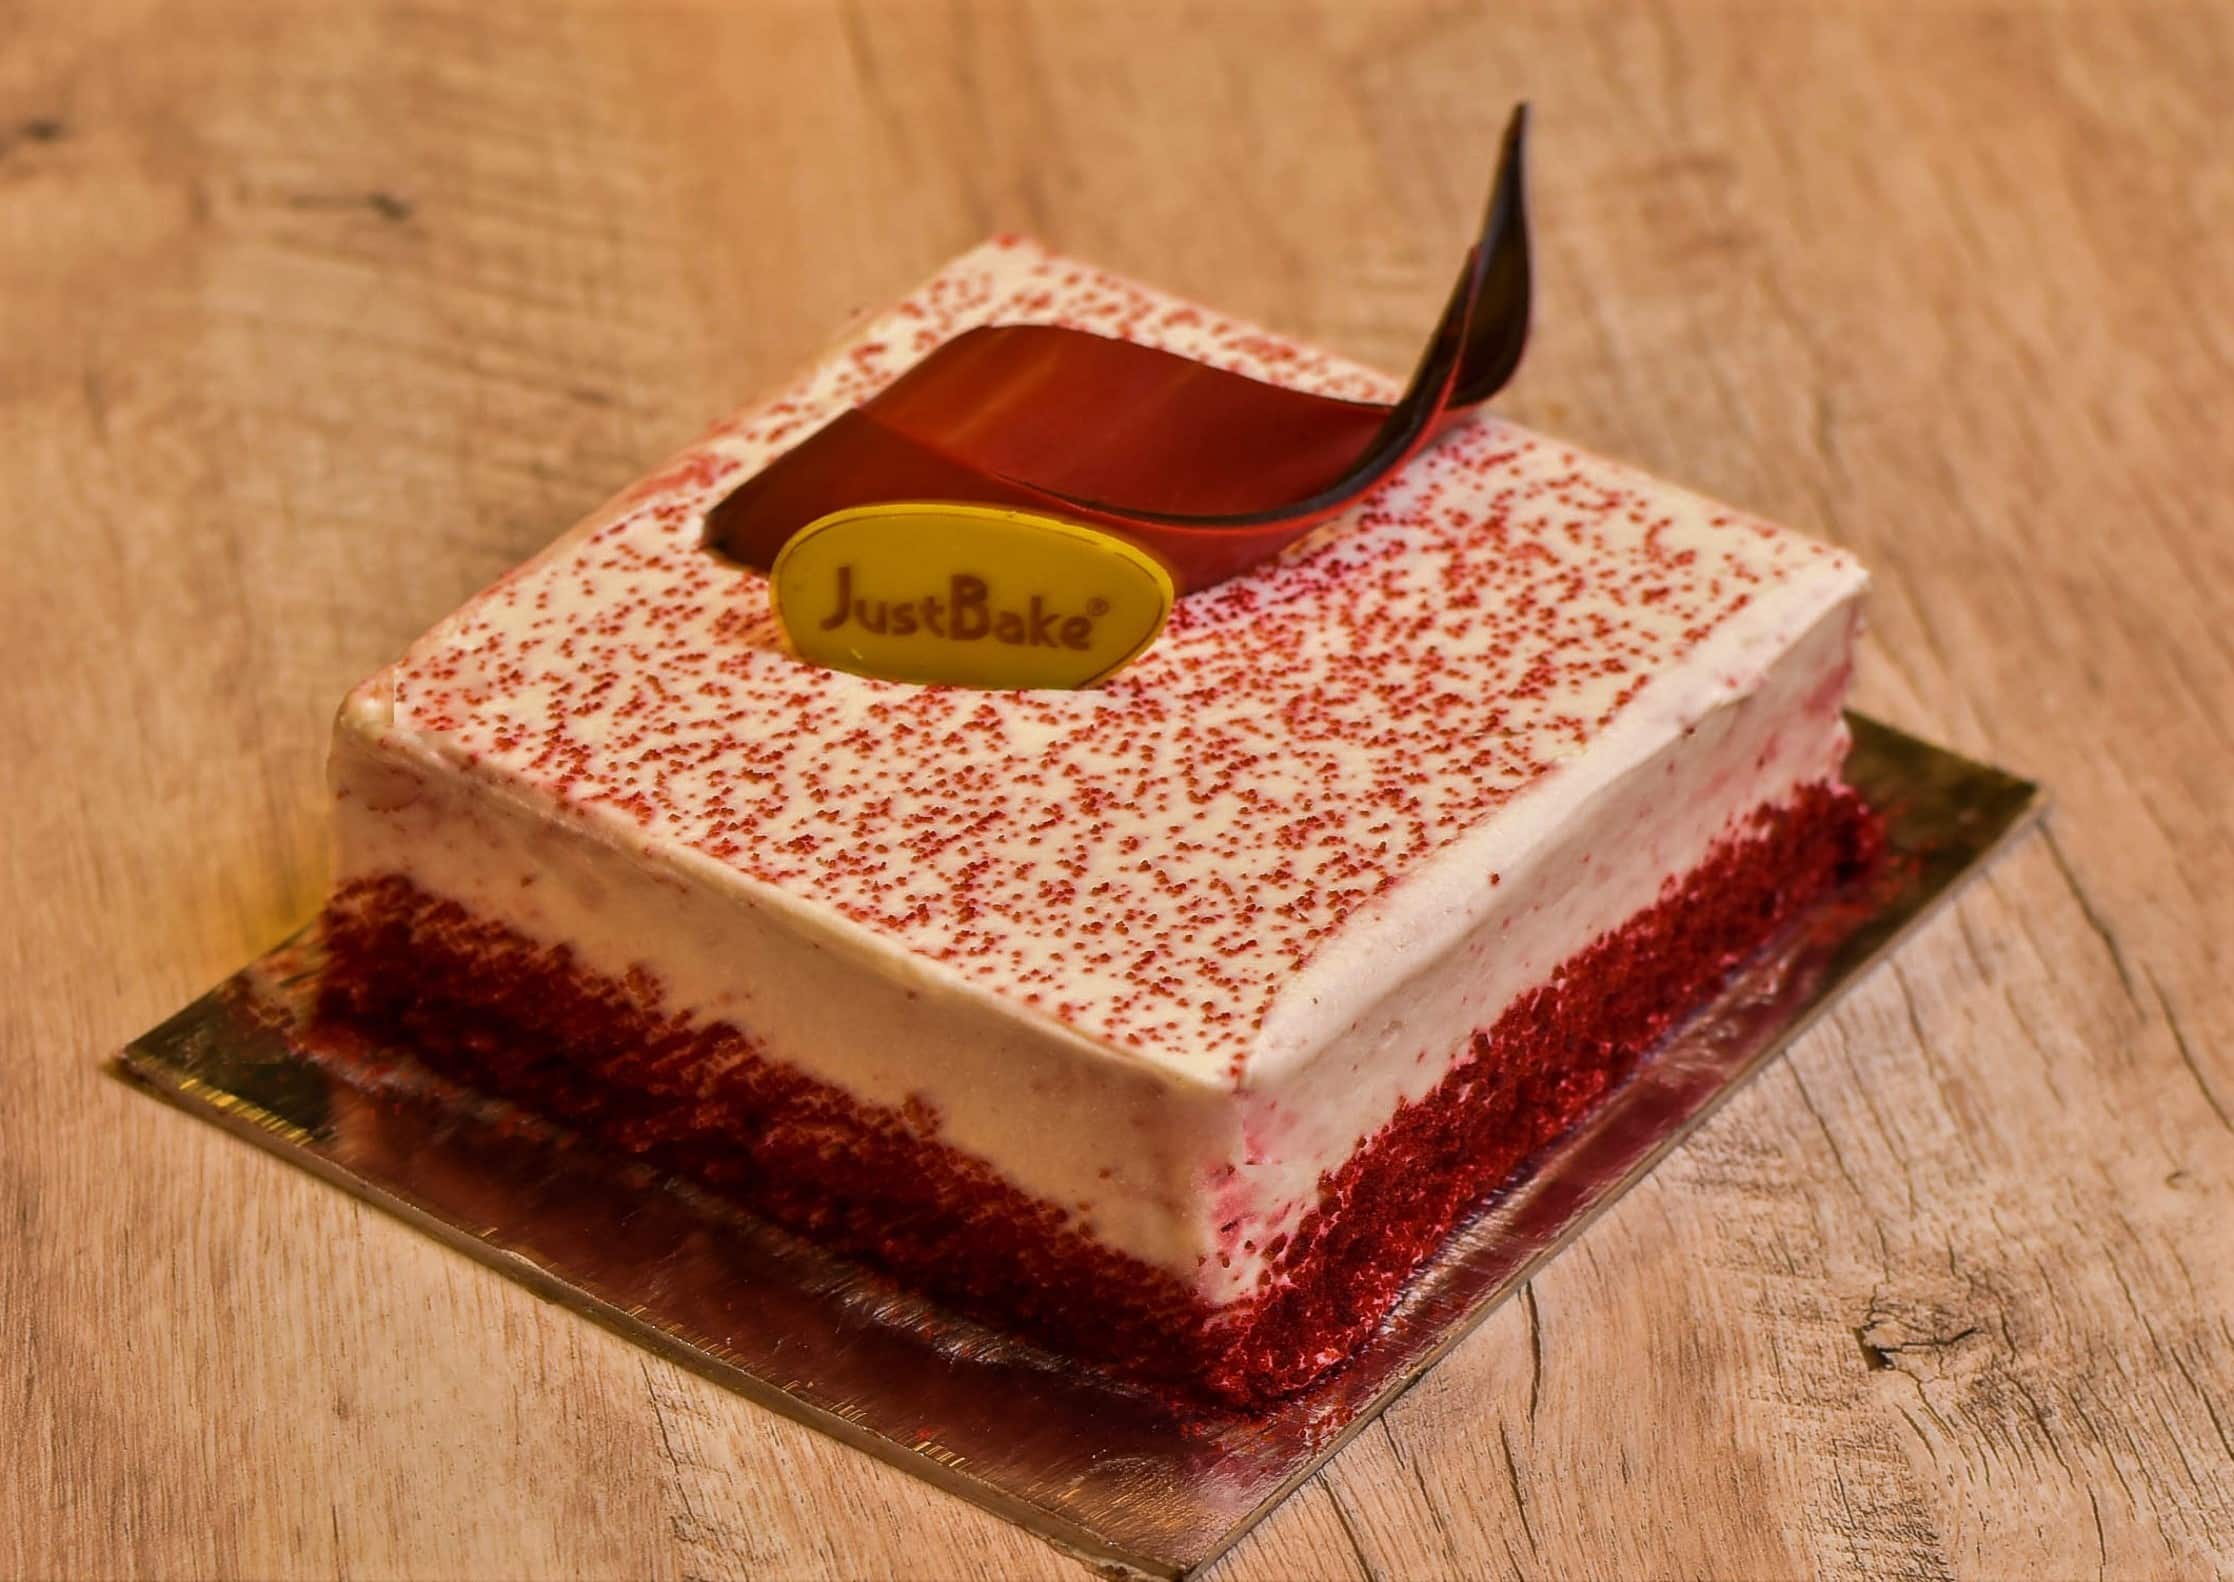 Just Bake in Richmond Town,Bangalore - Best Bakeries in Bangalore - Justdial